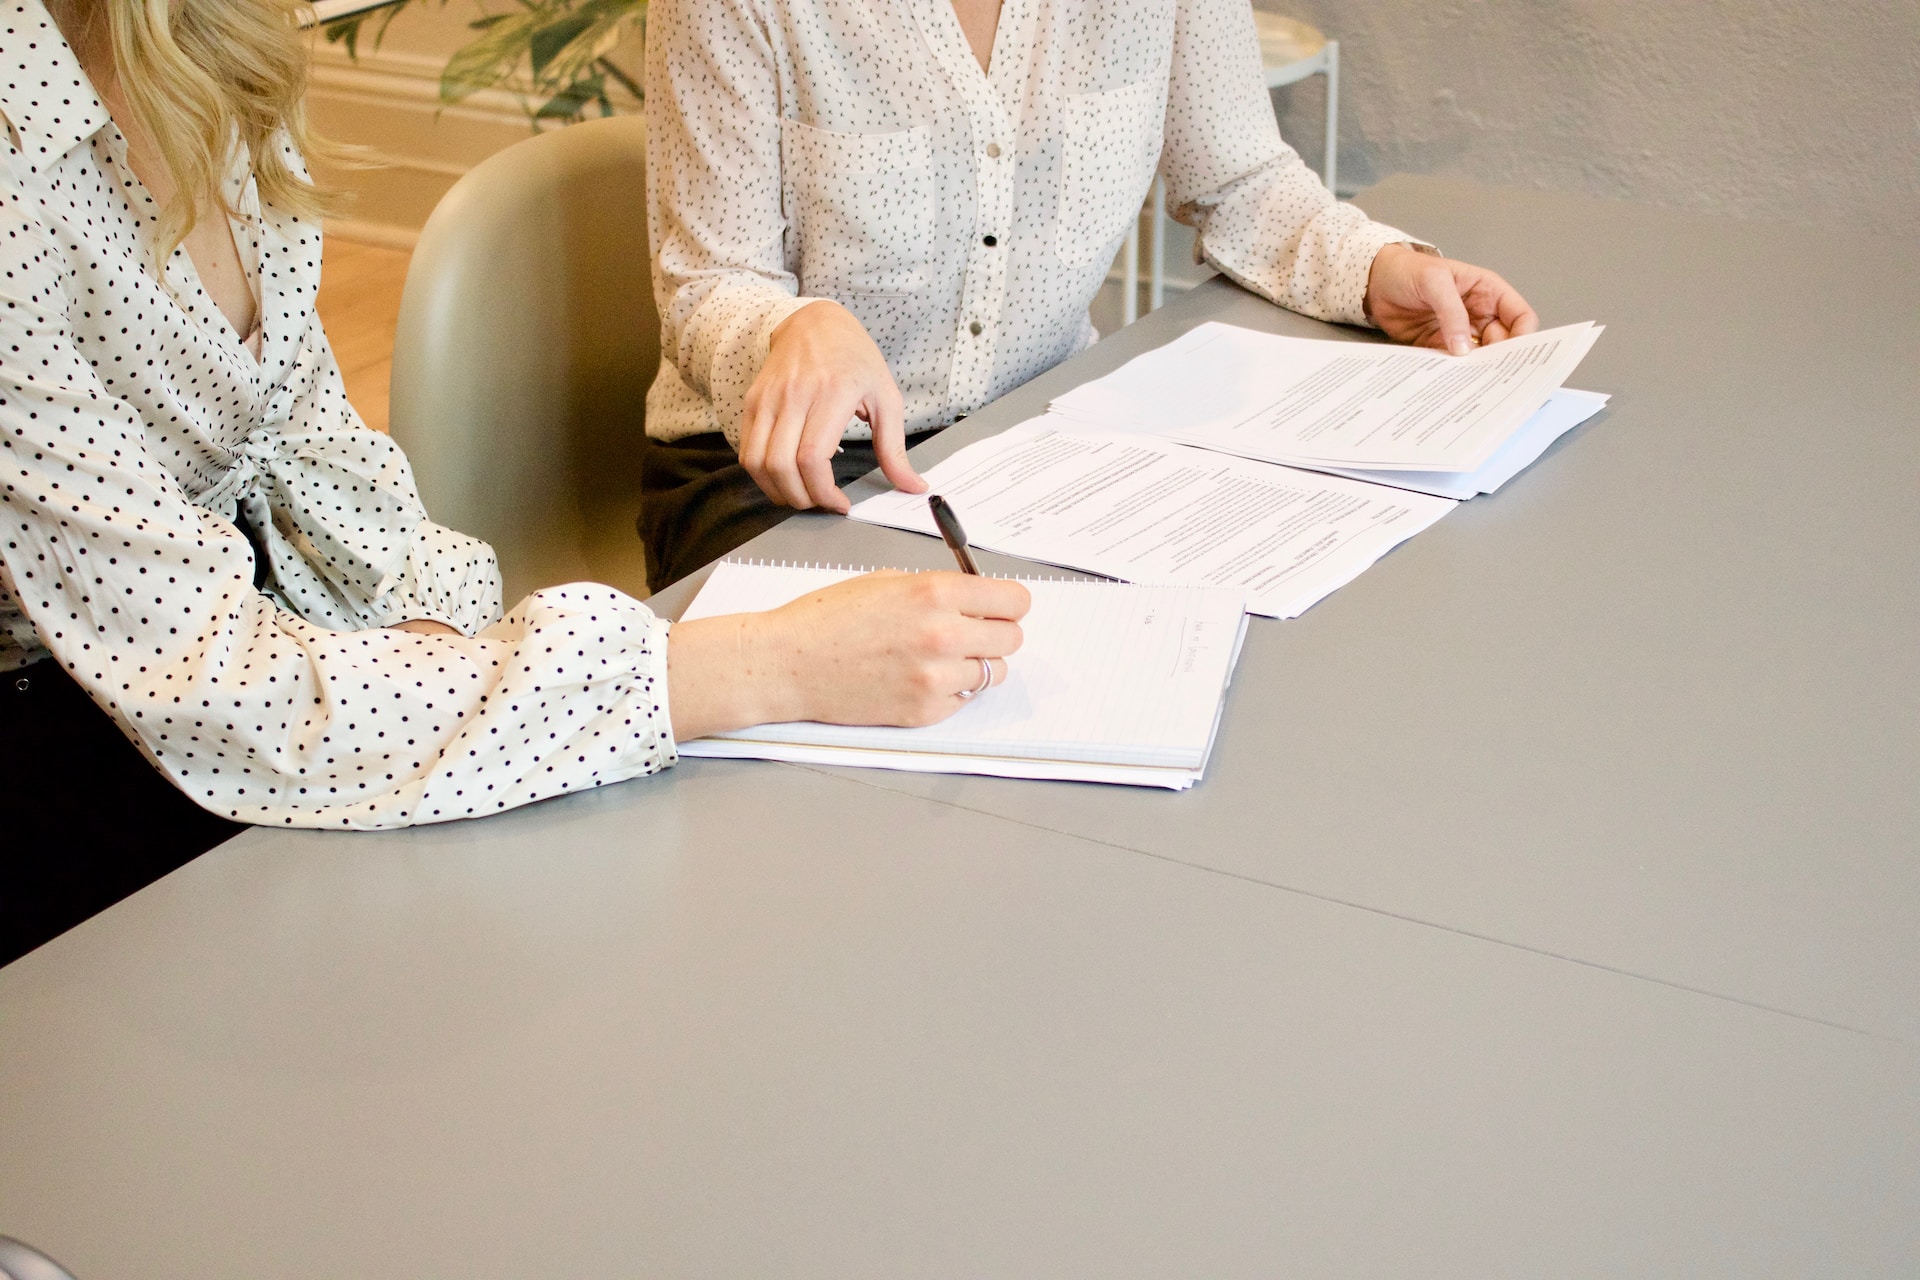 Two women with their hands on the table holding papers. 